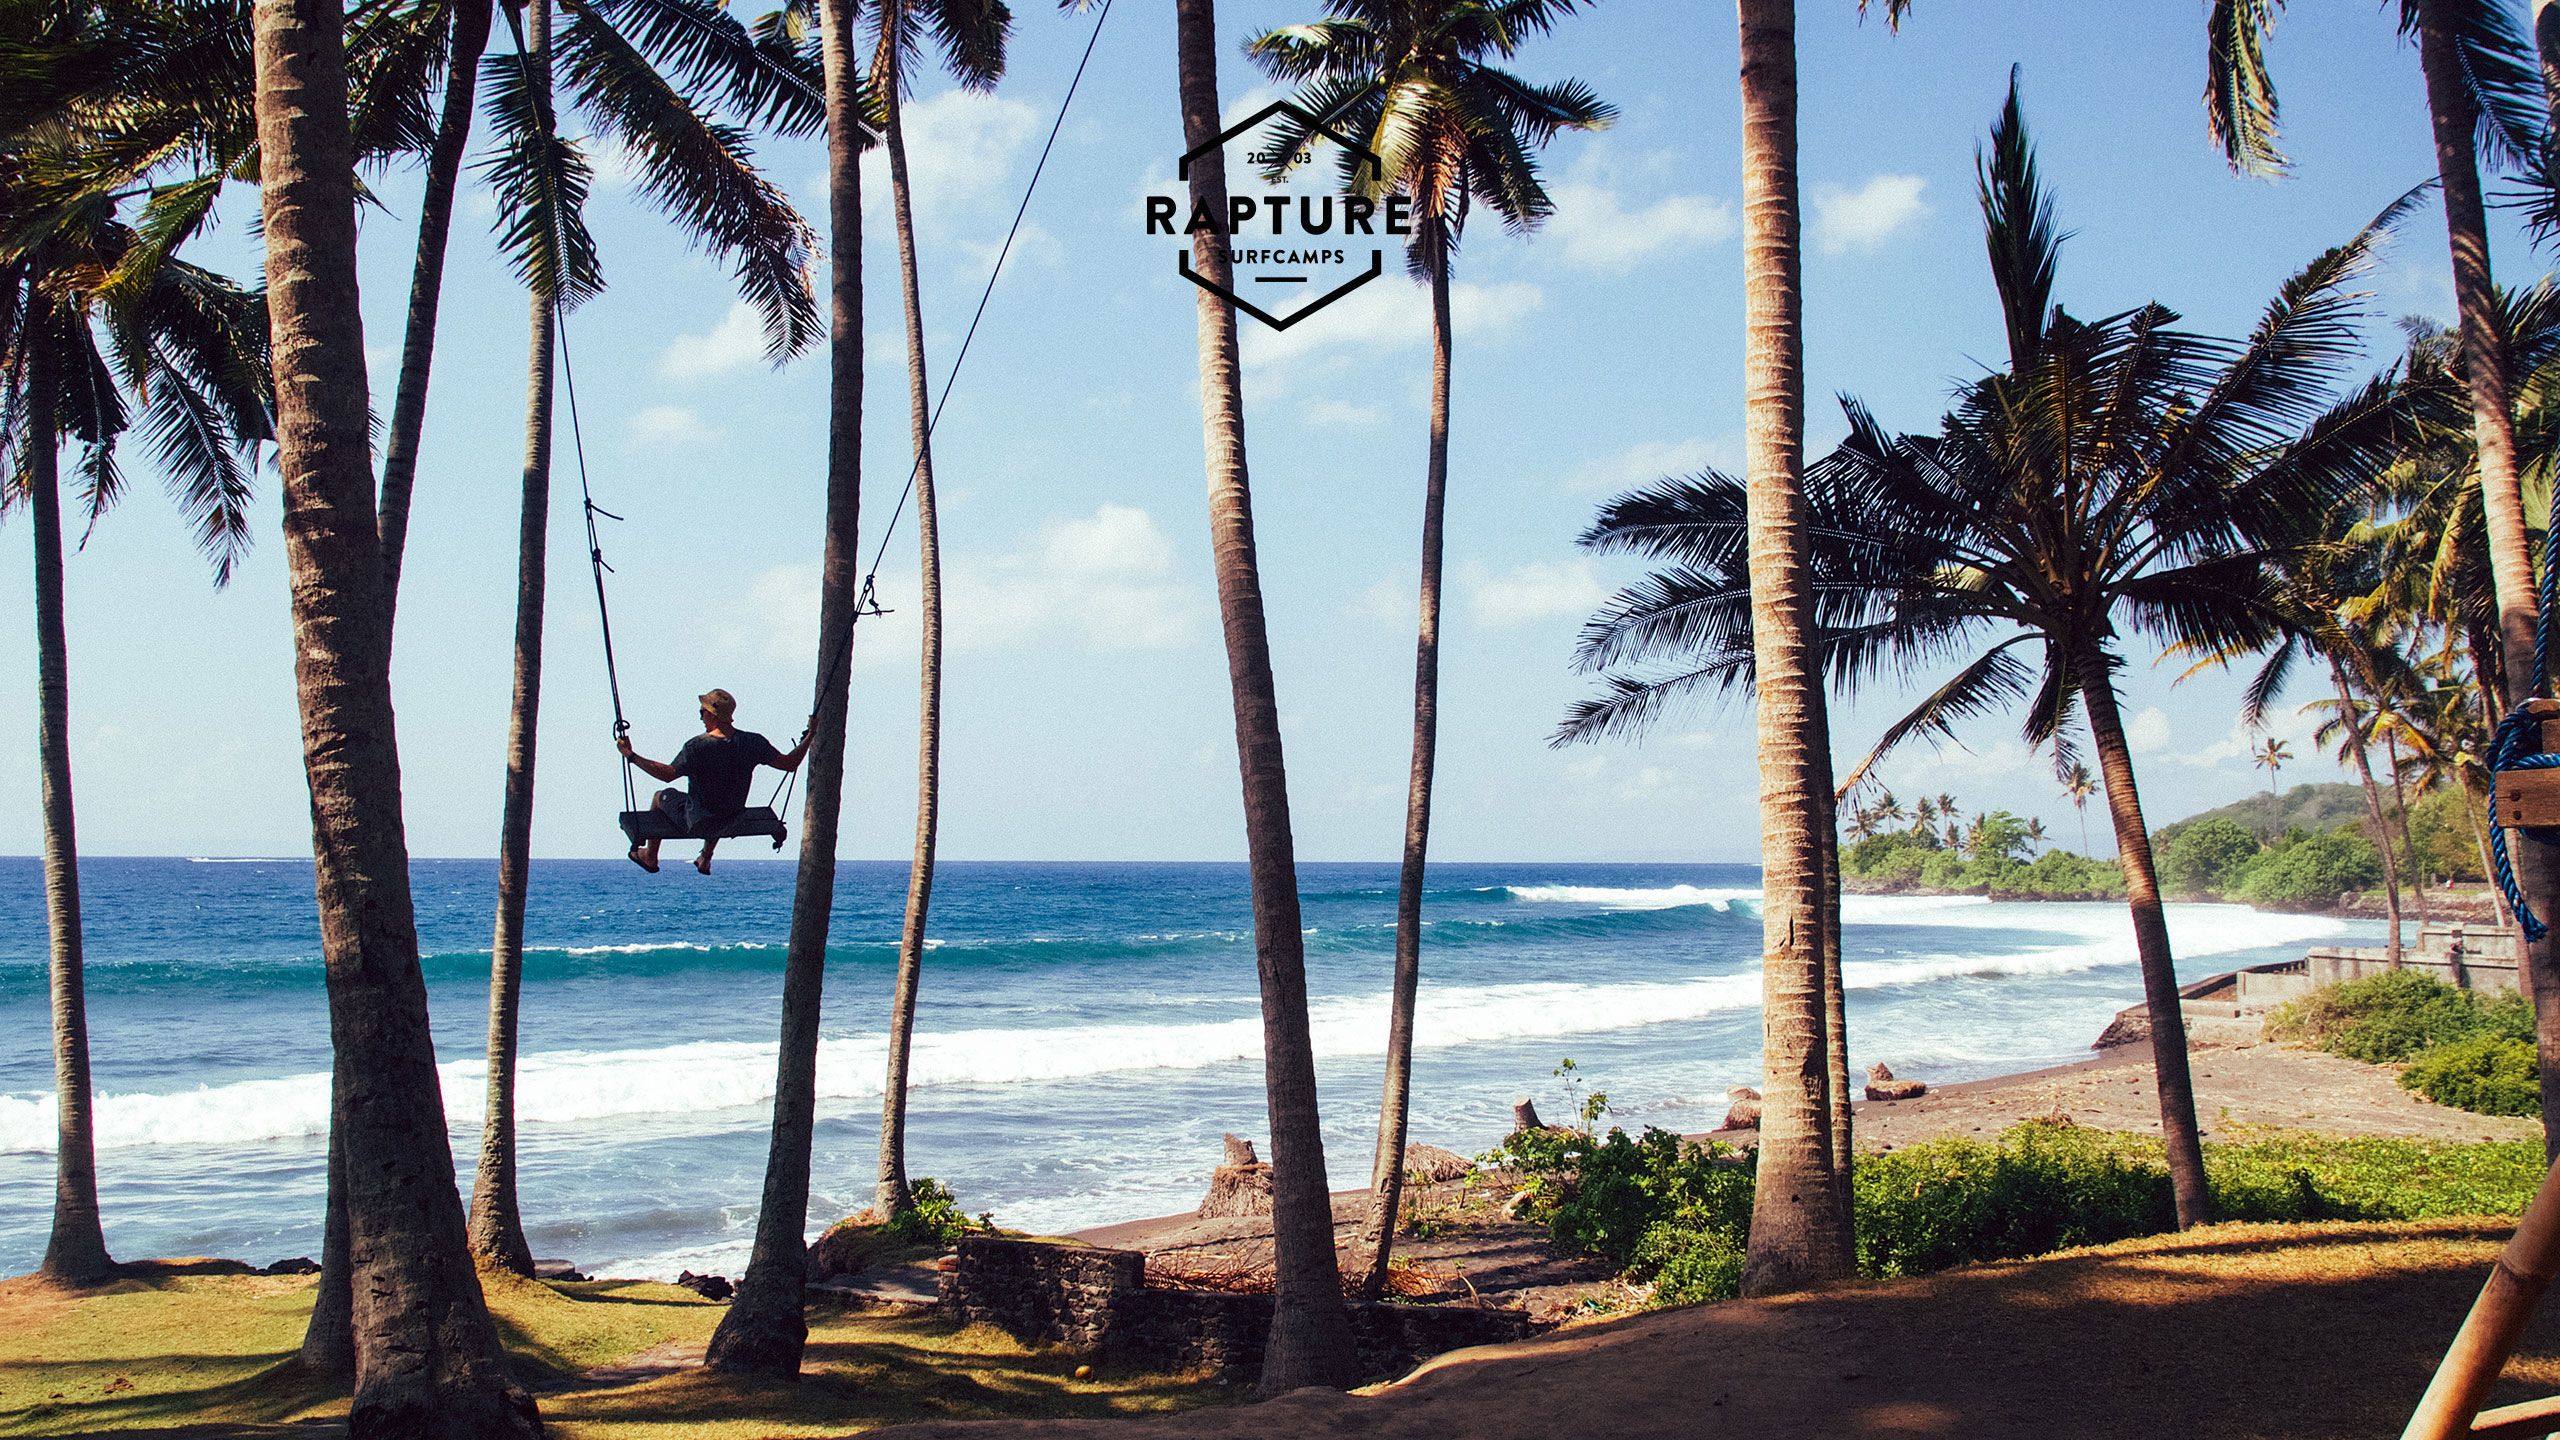 Free Surf Wallpaper from our Surfcamps